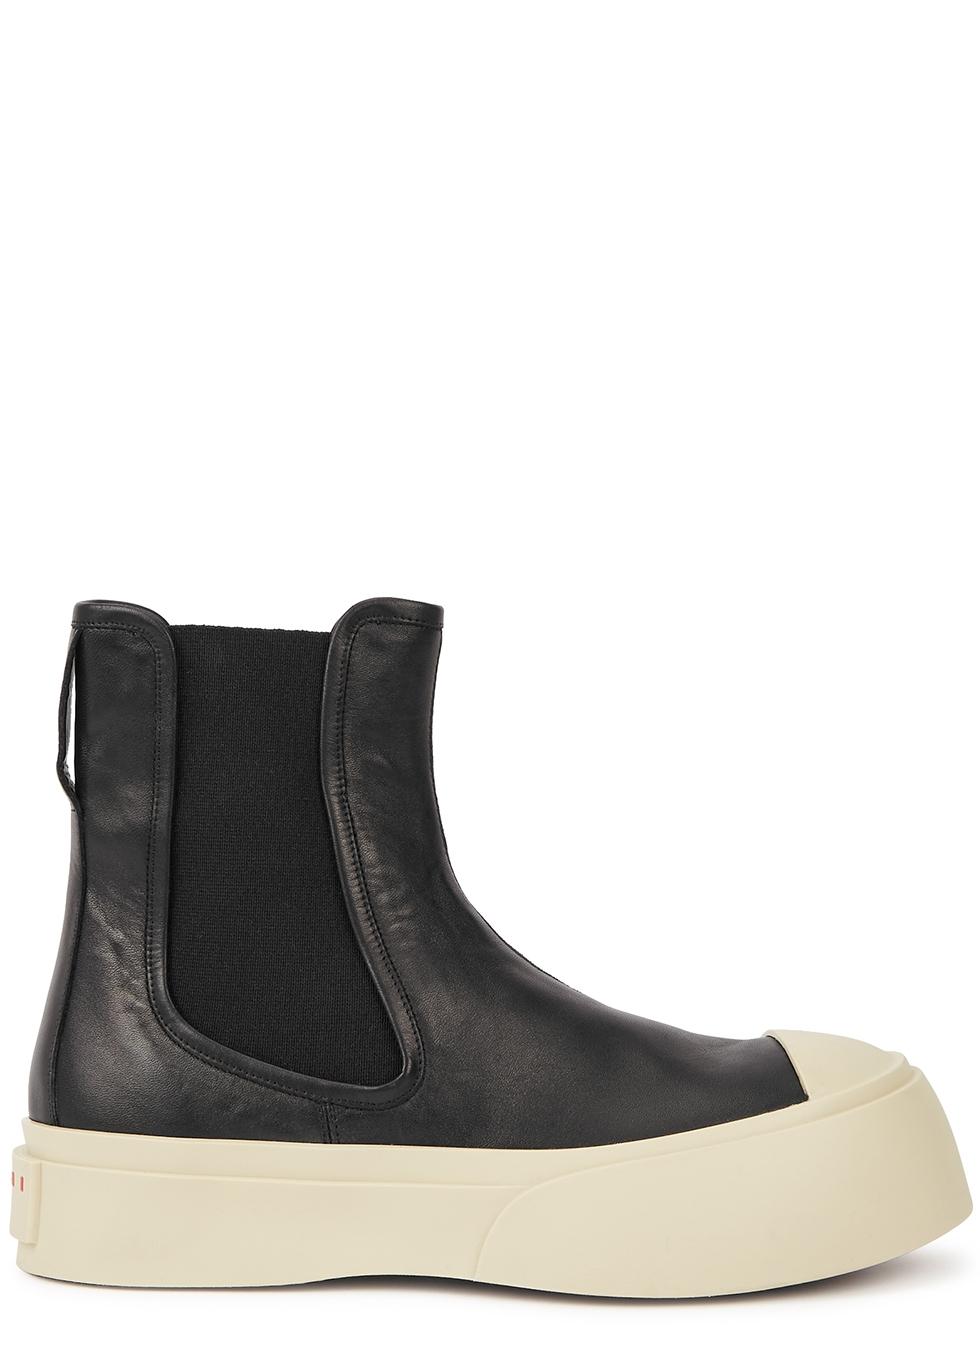 Marni Pablo Leather Chelsea Boots in Black | Lyst UK